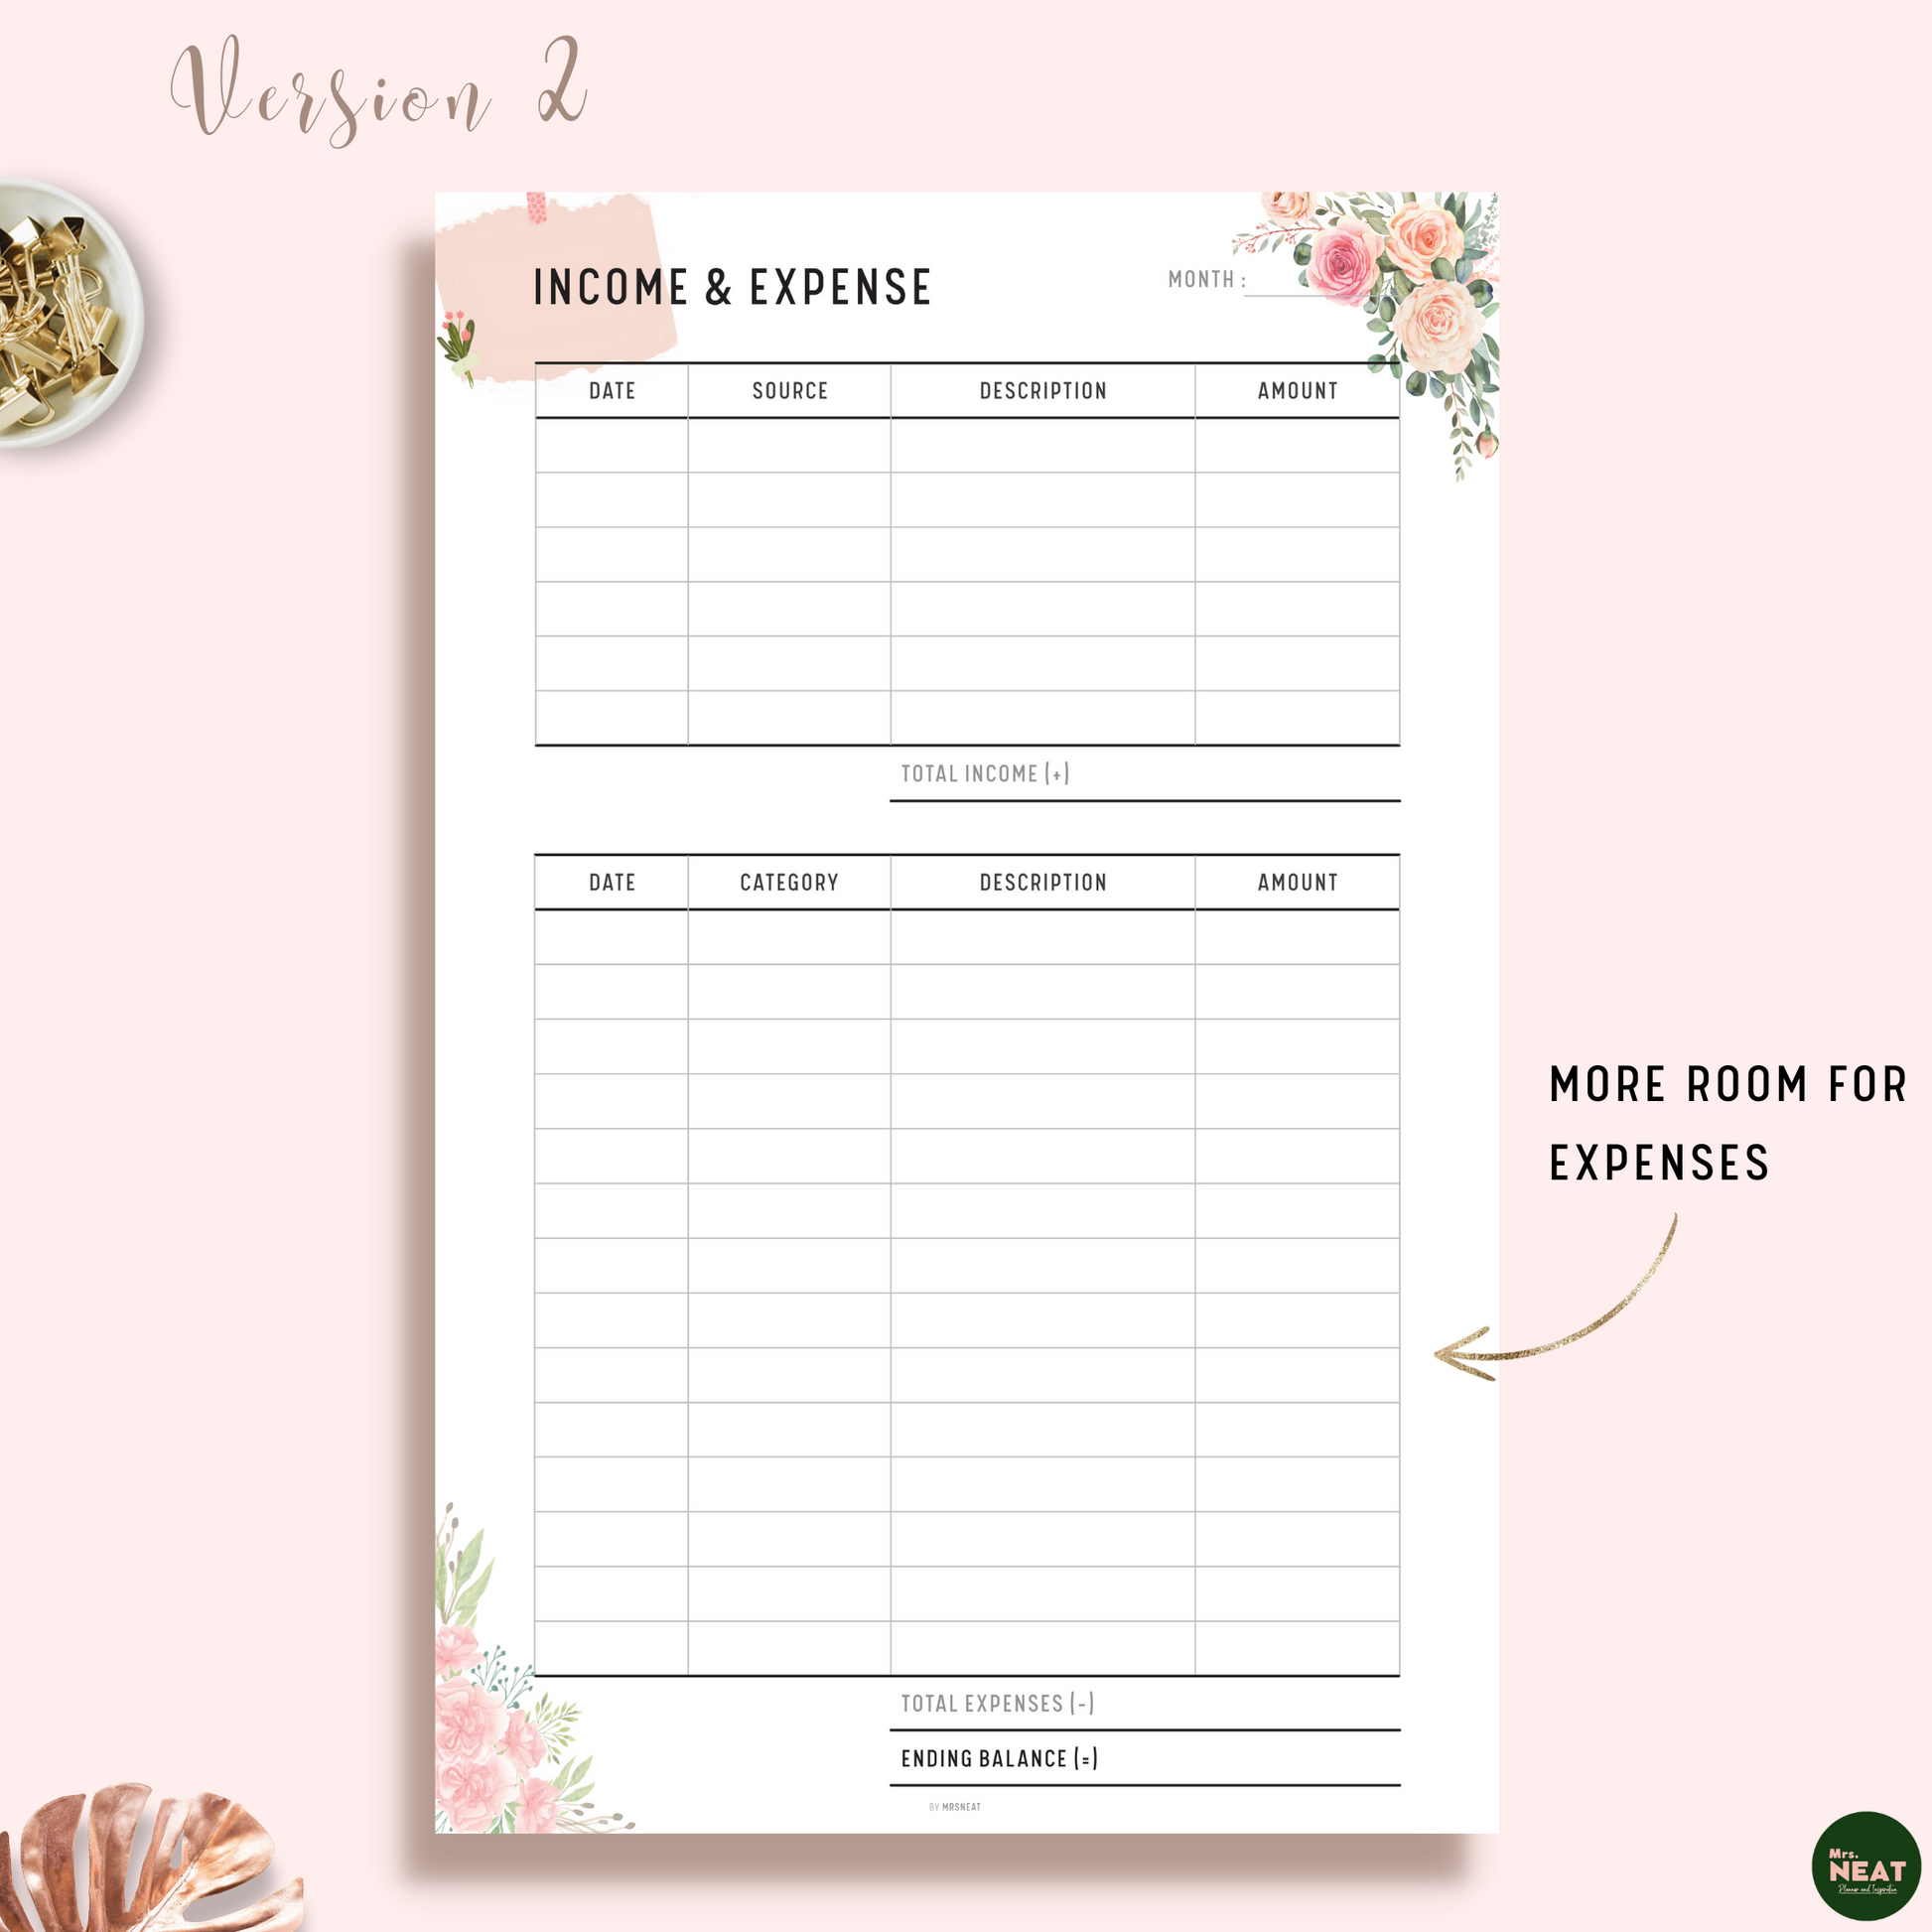 Beautiful Floral Income and Expense Tracker Planner with room income, expense and ending balance